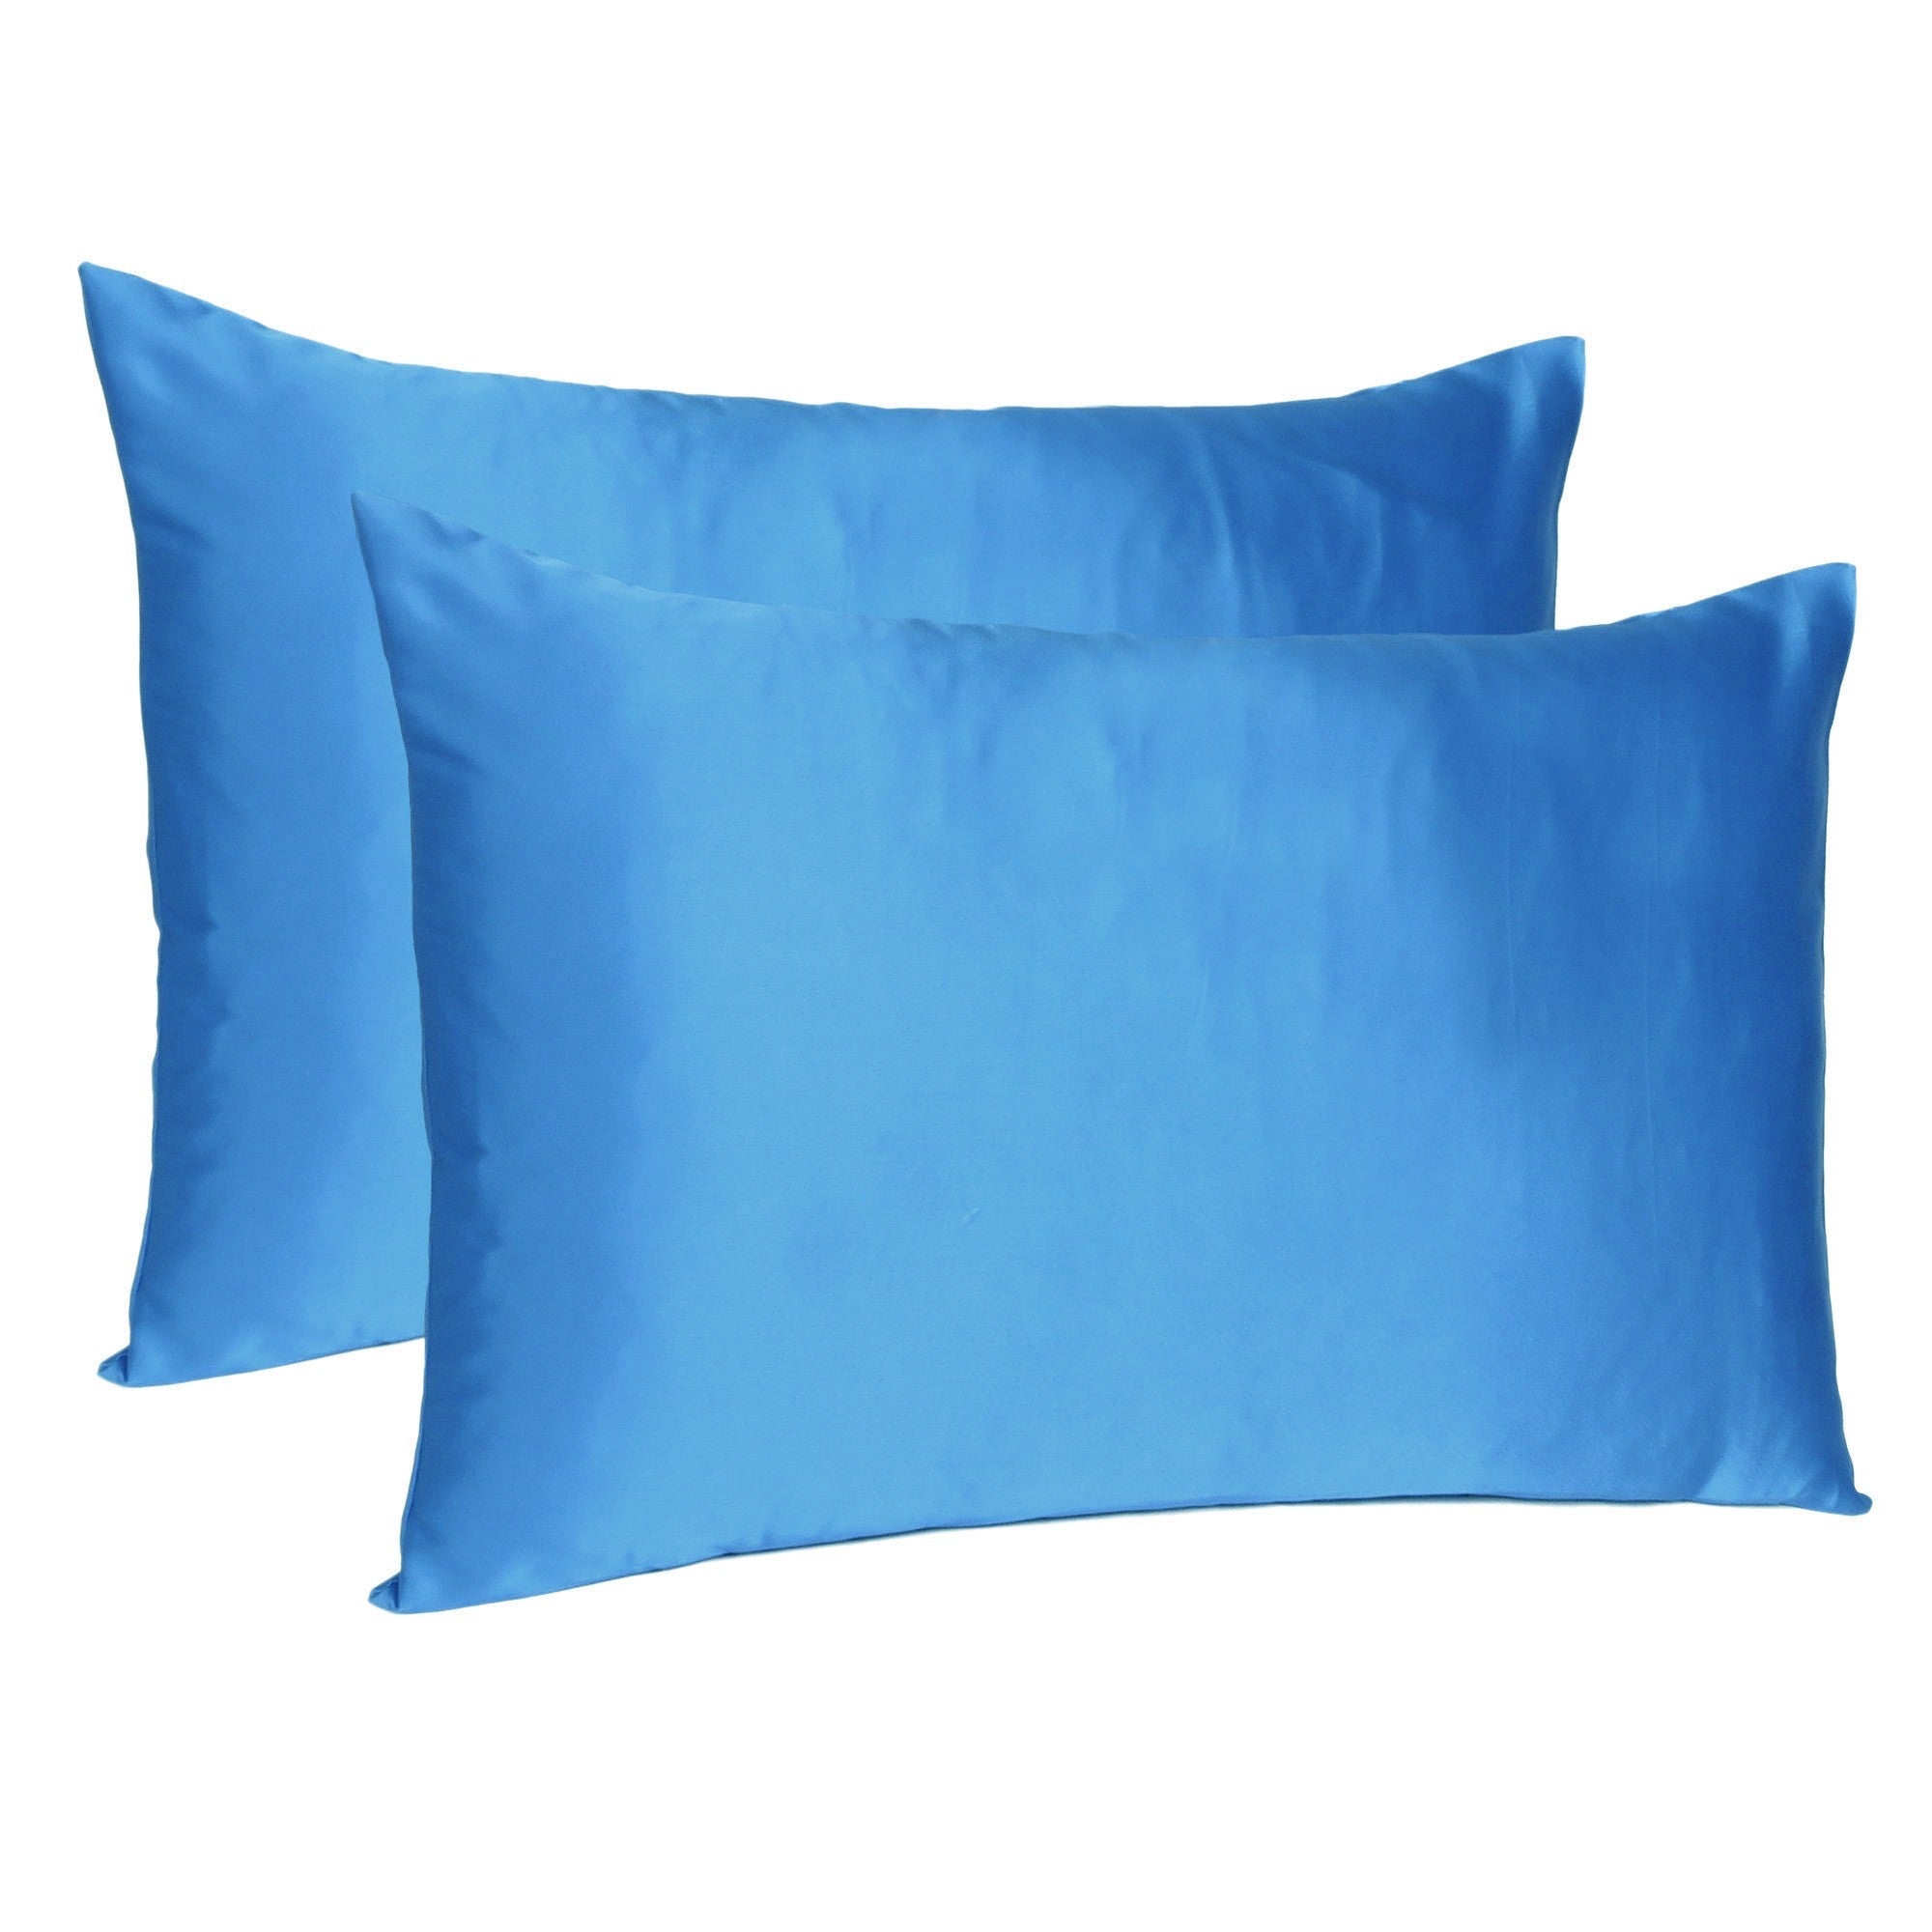 Set-of-Two-Bright-Blue-Dreamy-Silky-Satin-King-Pillowcases-Bed-Sheets